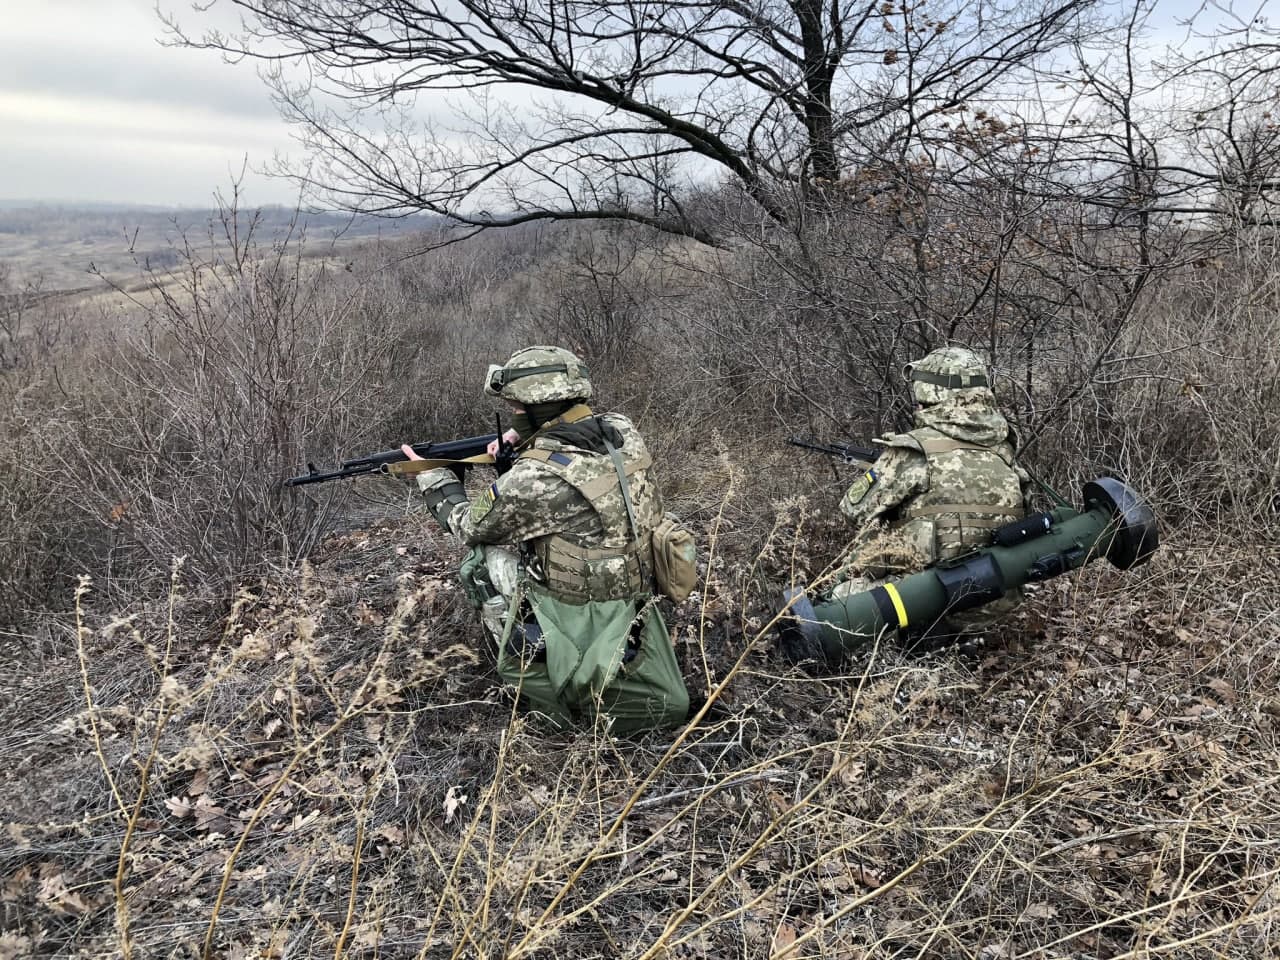 United States and NATO alliance members working over supplying Stinger missiles to Ukraine, FGM-148 Javelin missile, Defense Express